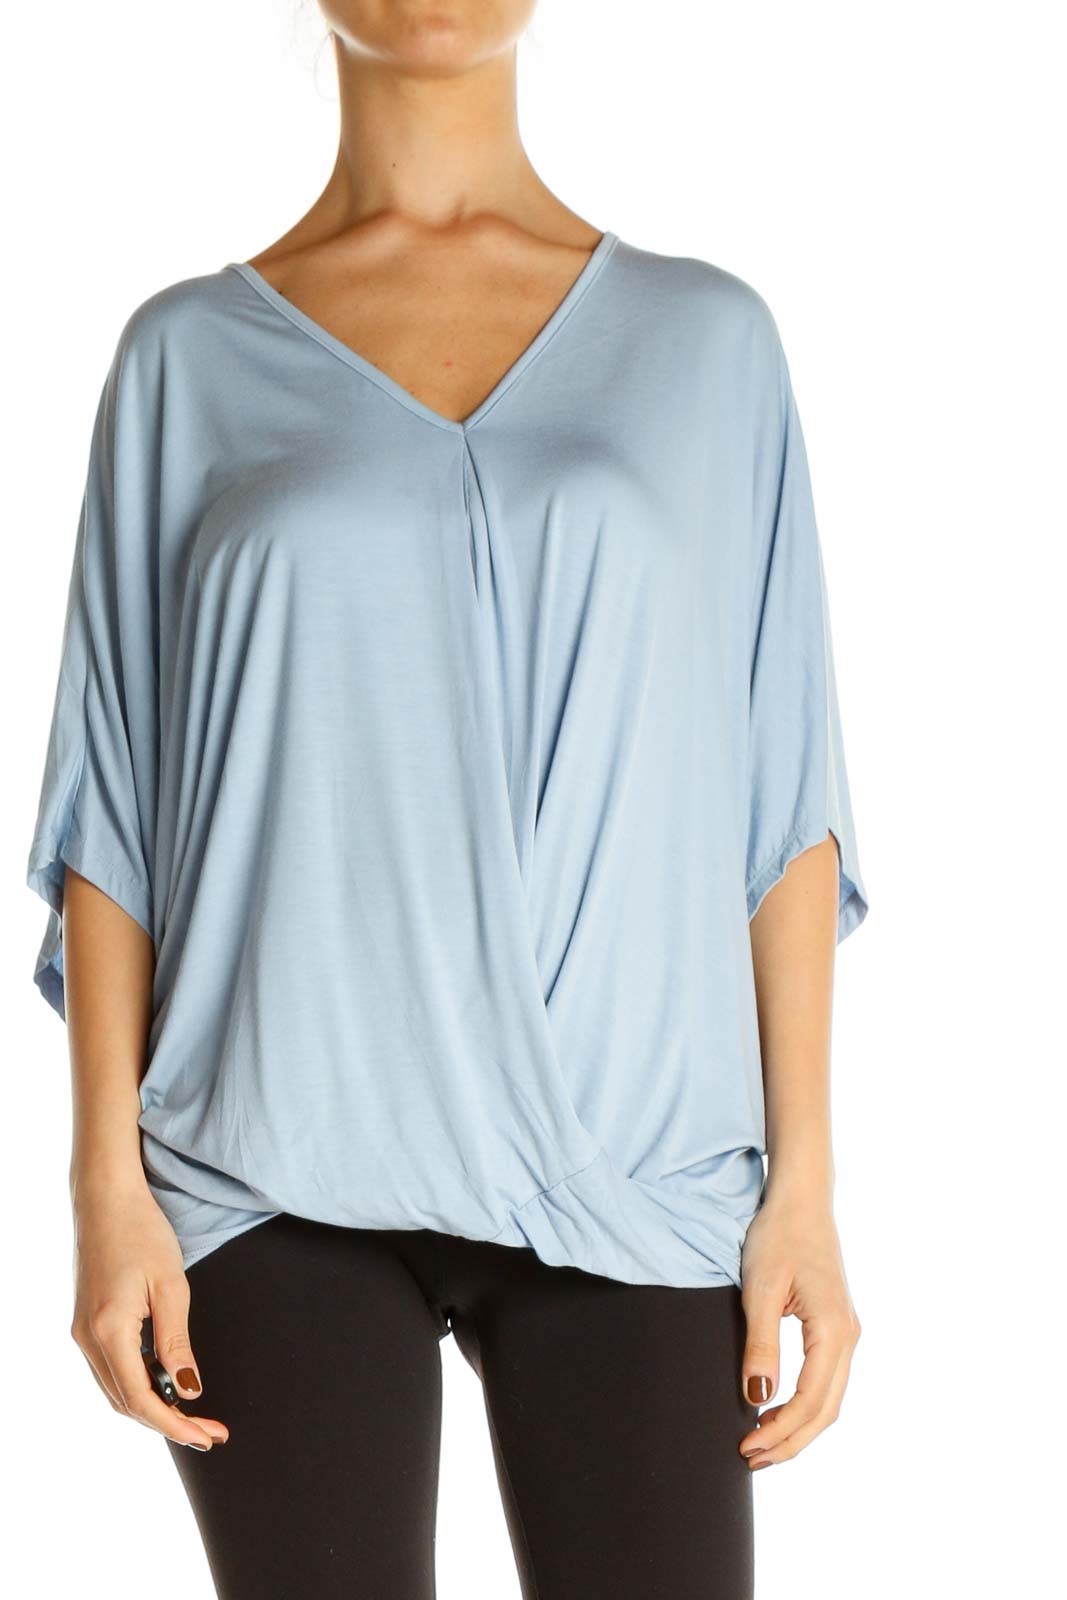 Blue Solid Casual T-Shirt Front